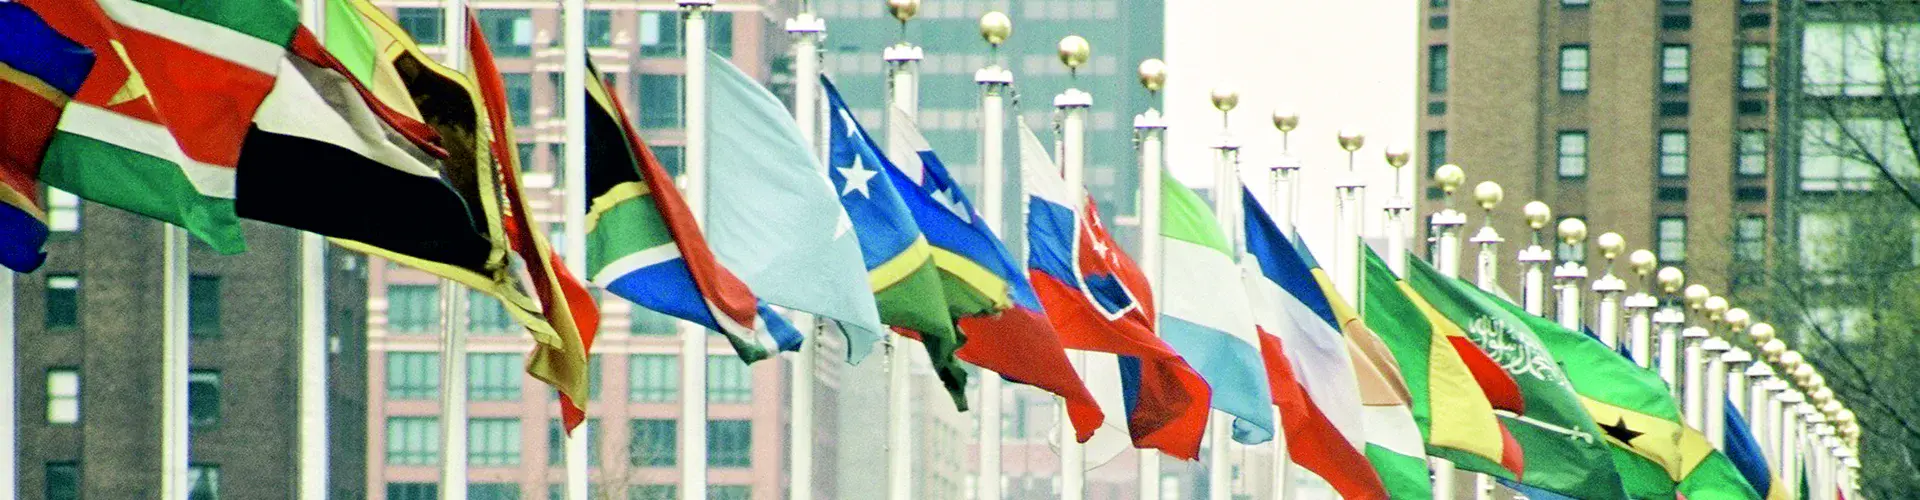 Flags outside the United Nations building (Credit: Wikimedia Commons)